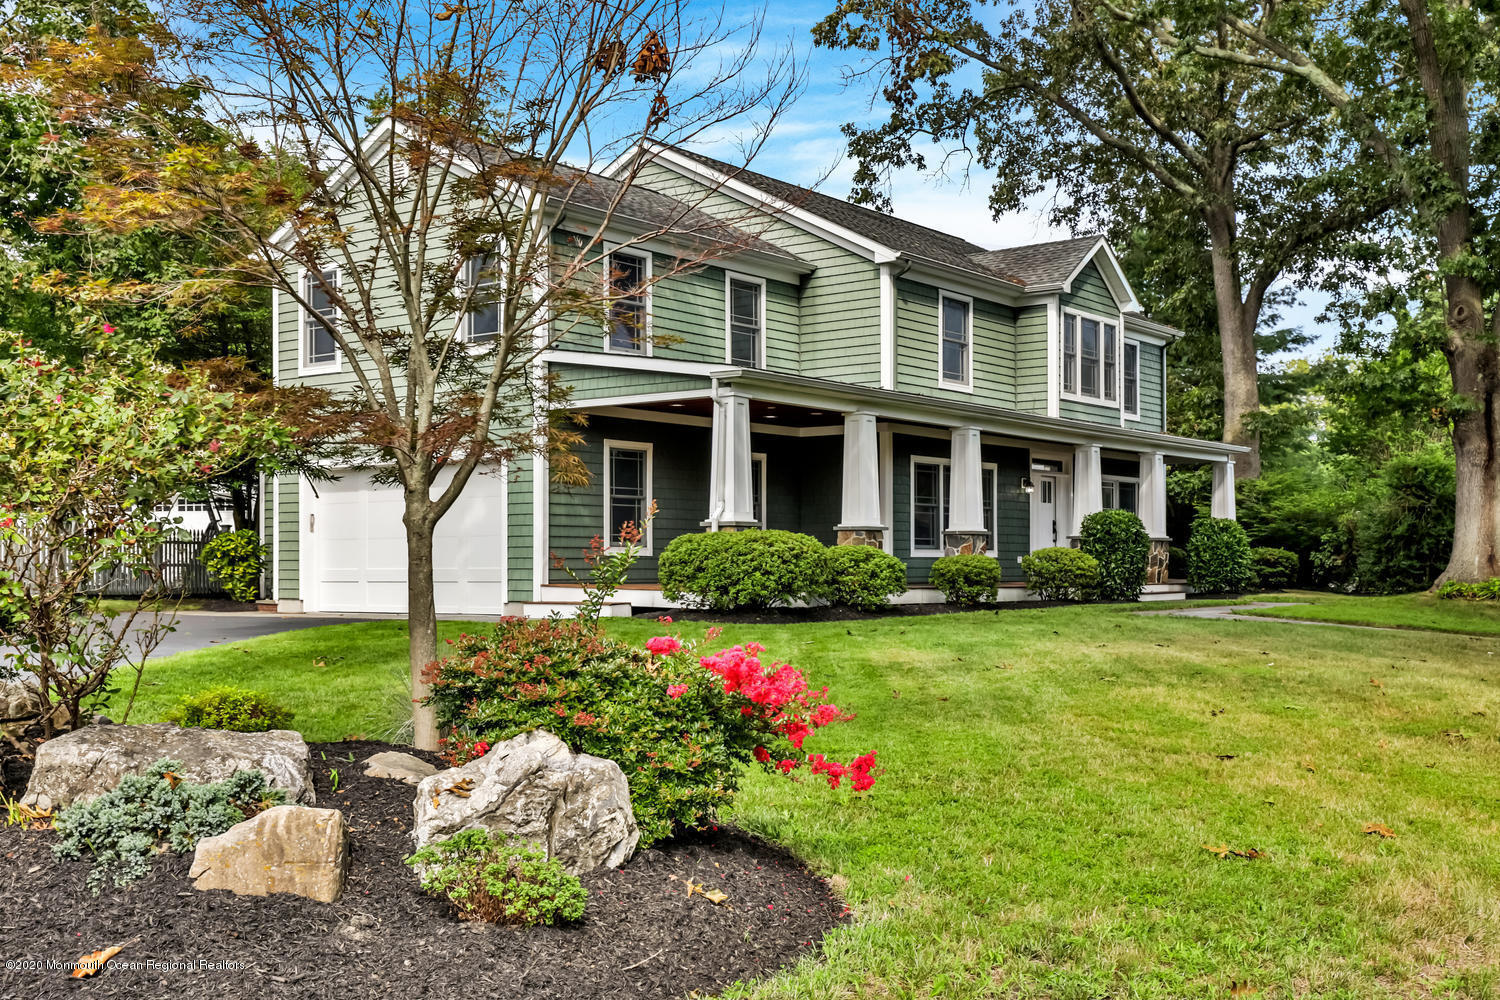 Welcome to 16 Robin Rd., Rumson